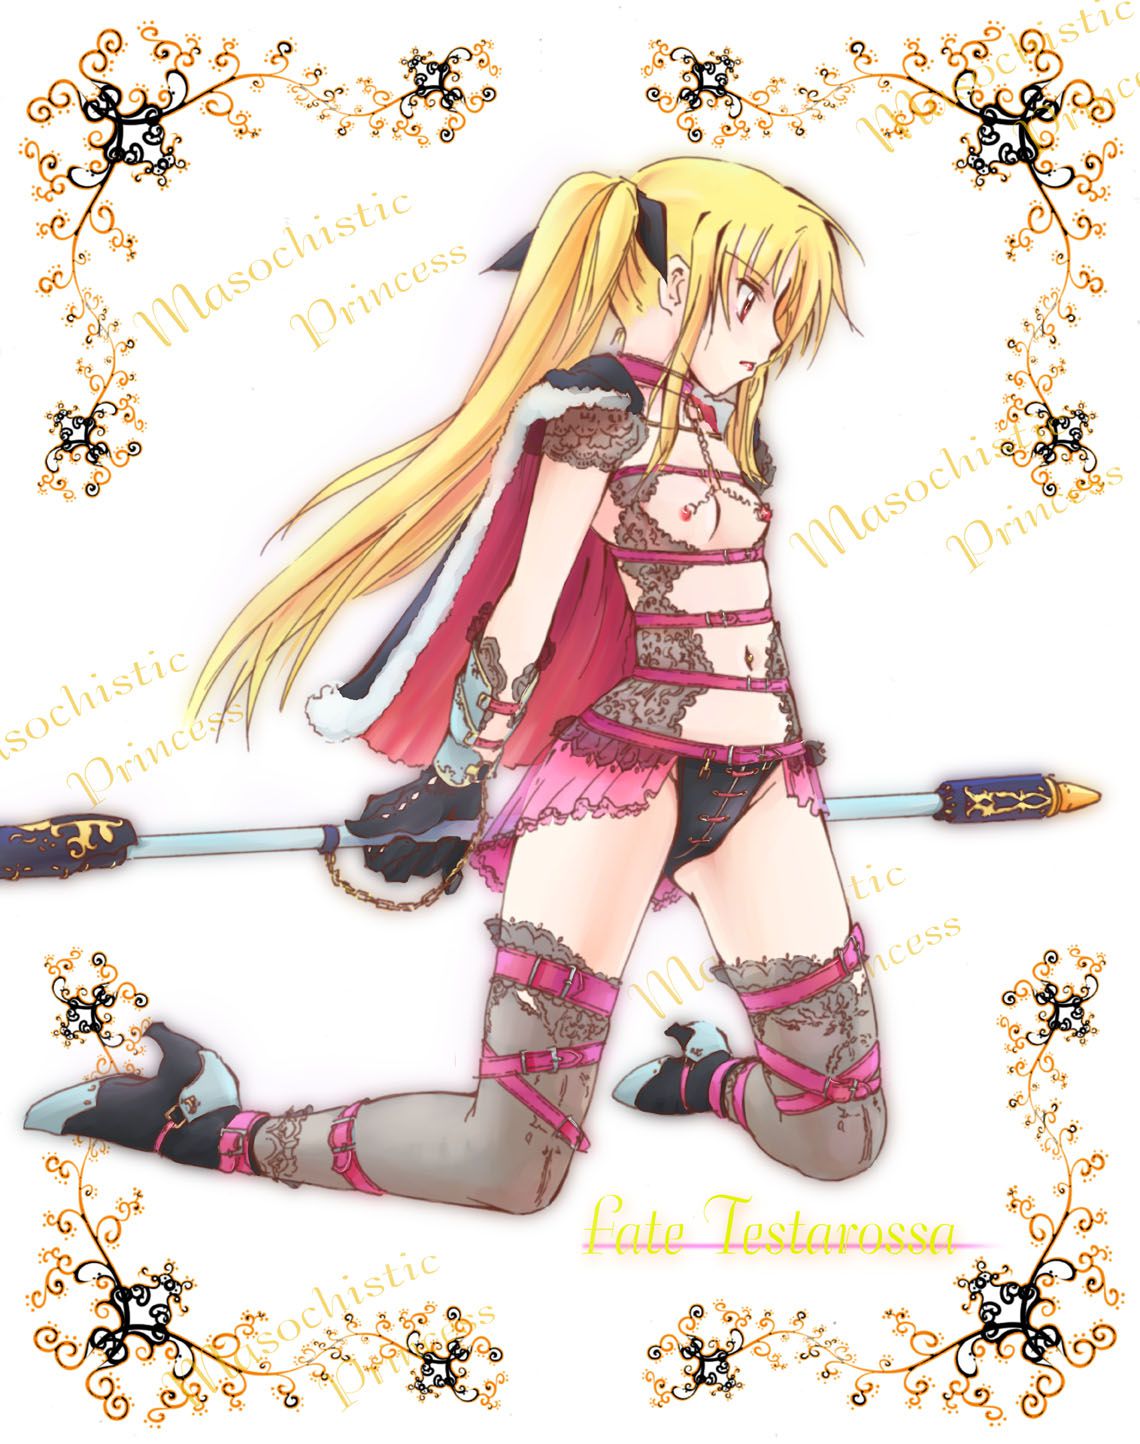 [Magical Girl Lyrical Nanoha] Let's be happy to see the photo of Fate Testarossa! 16